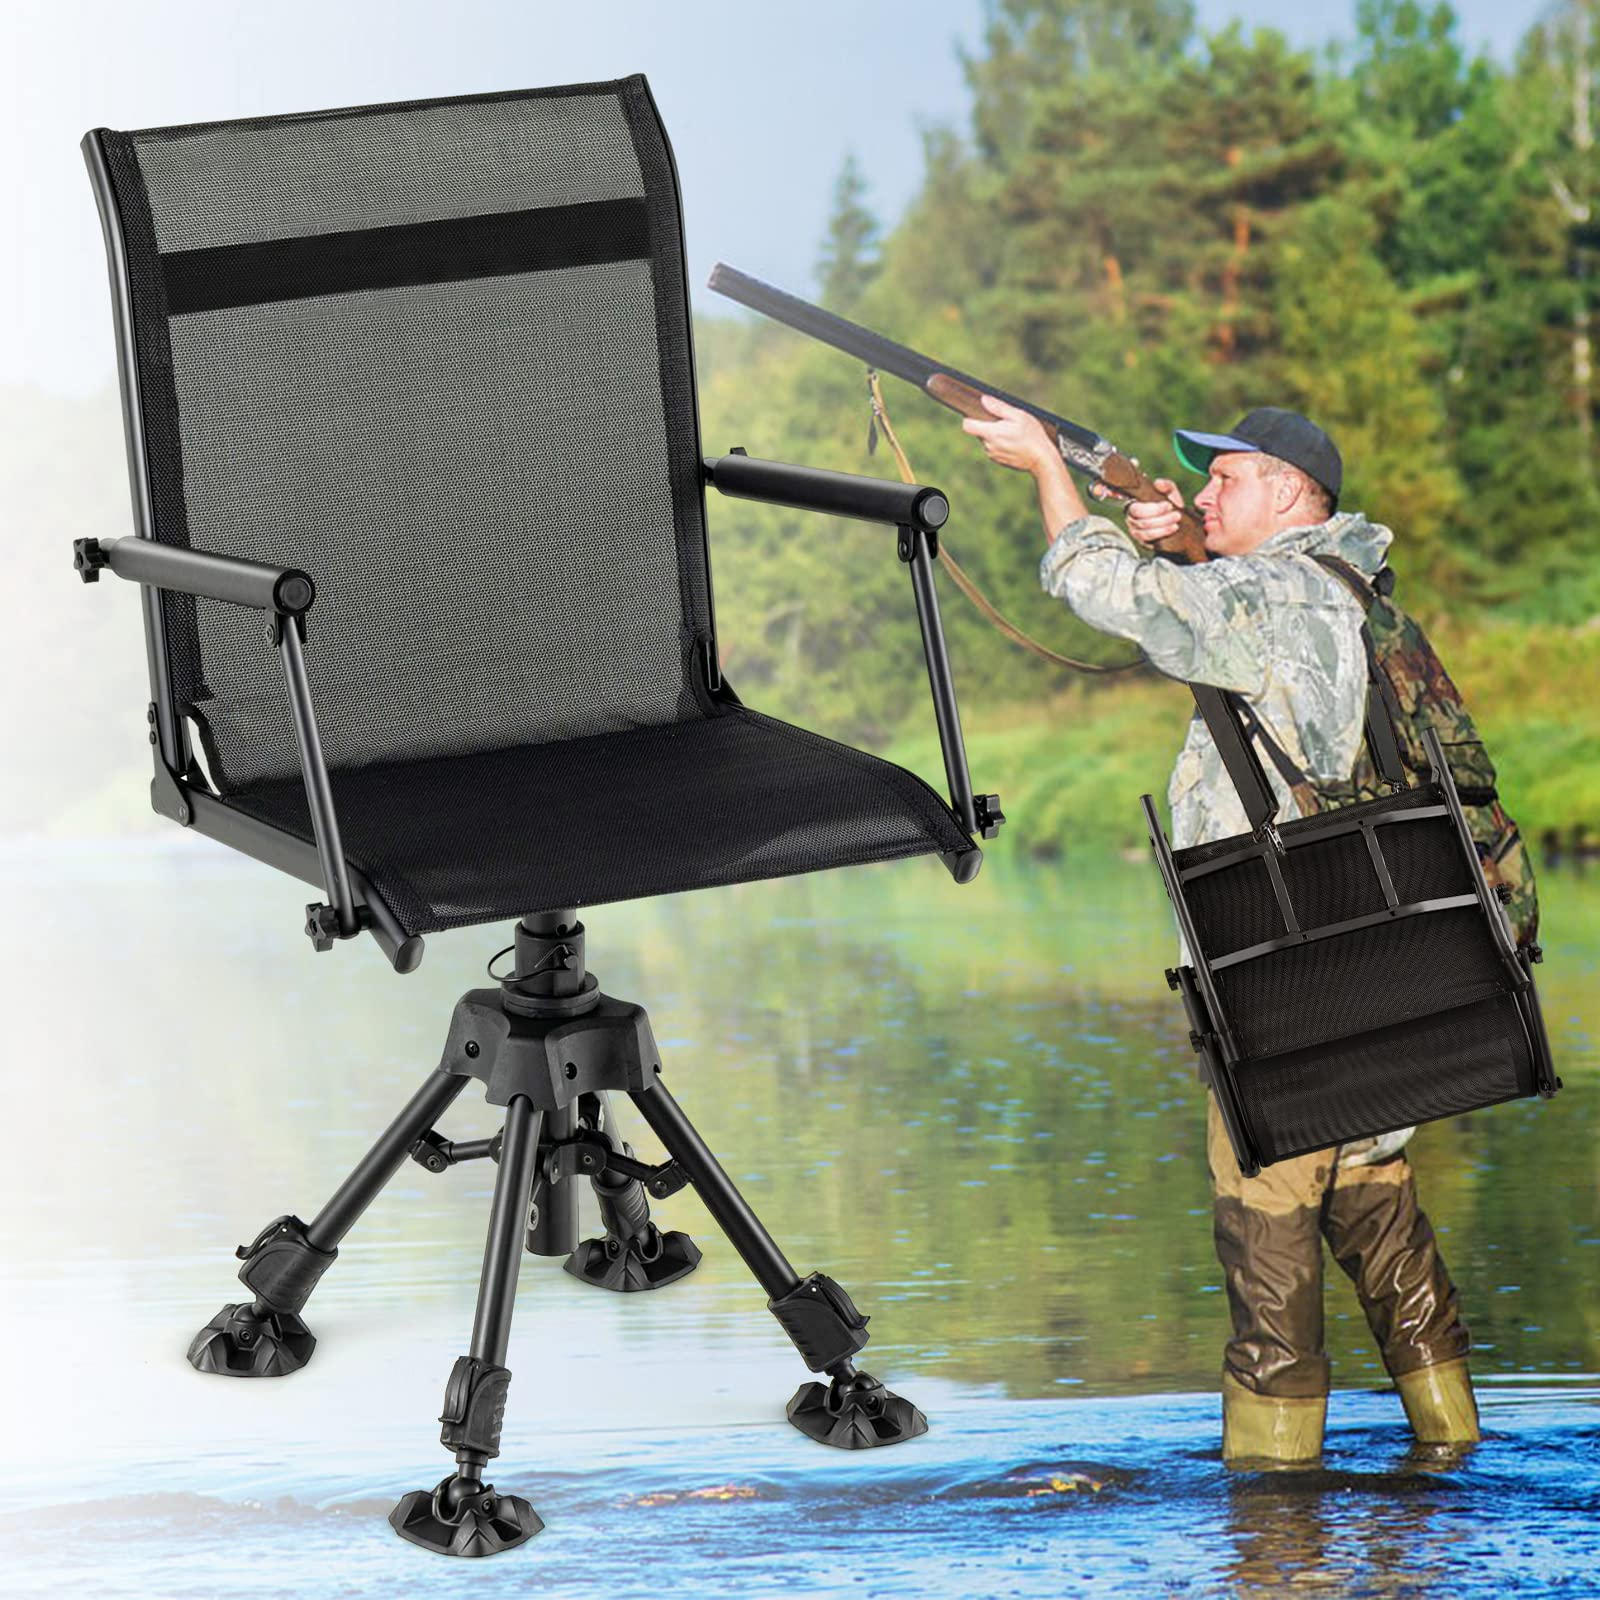 Giantex Swivel Hunting Blind Chair - Foldable 360° Hunter Chair with Oversized Duck Feet